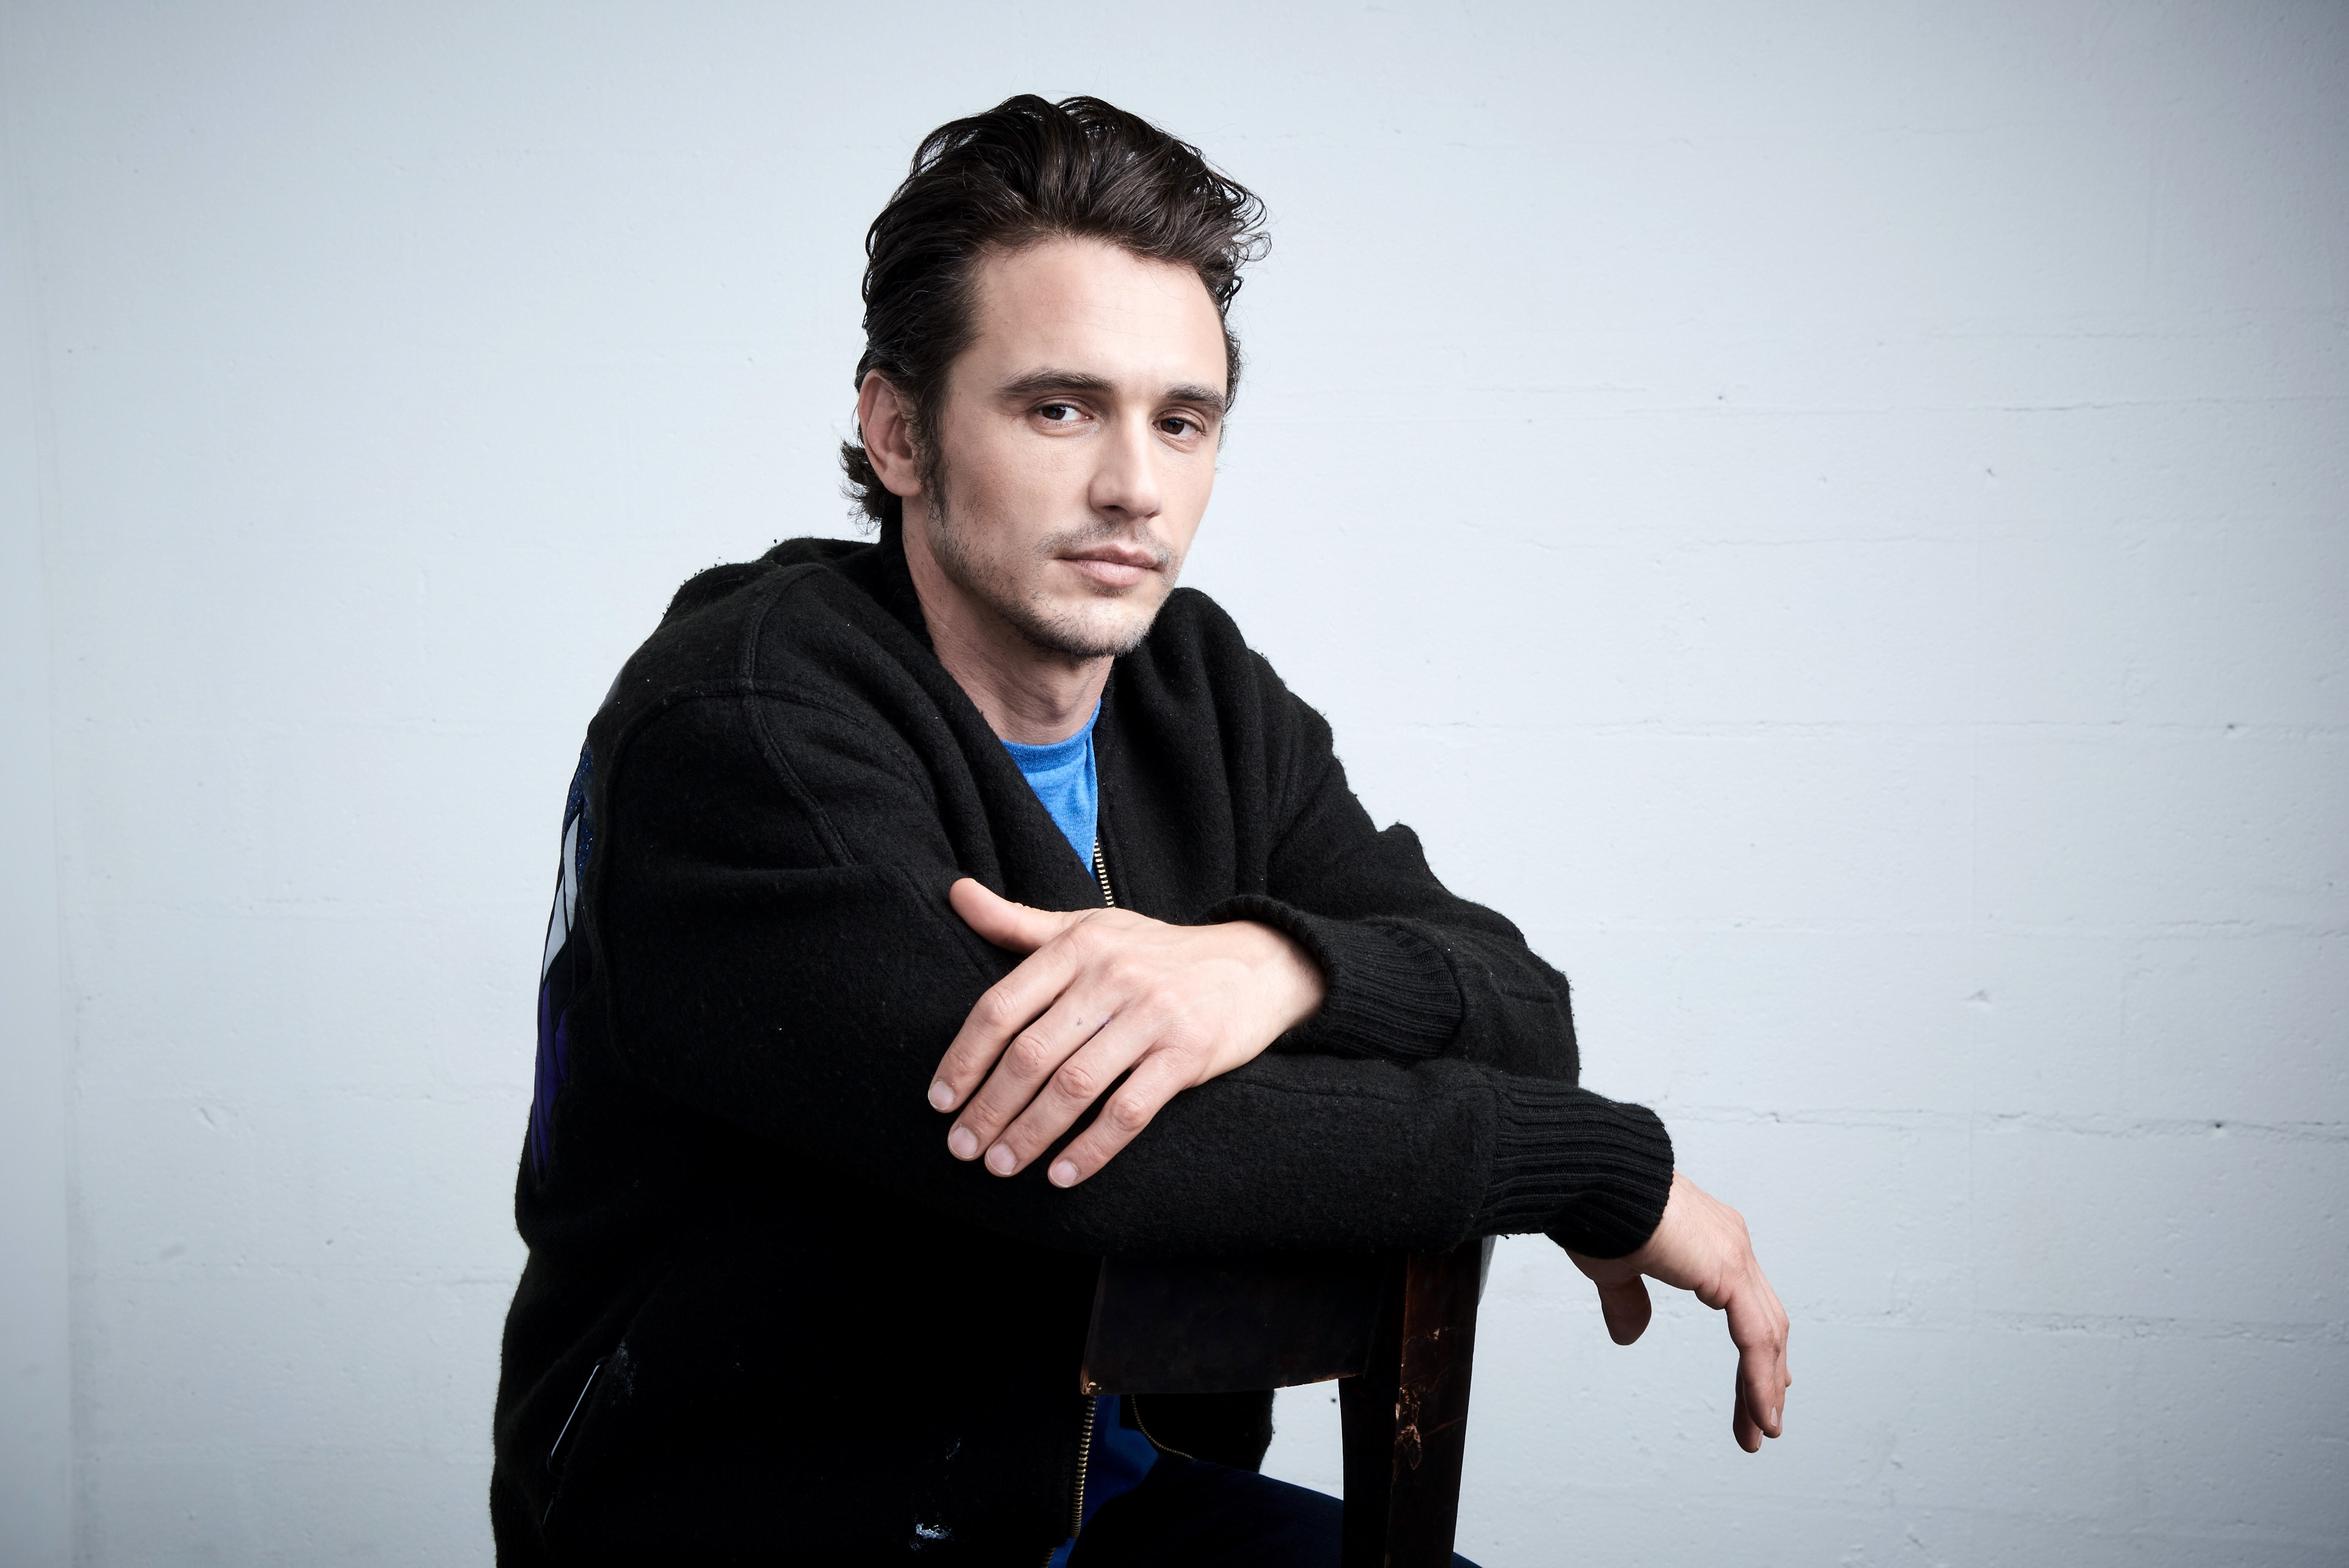 James Franco poses at the Tribeca Film Festival Getty Images Studio on April 16, 2016 in New York City. (Larry Busacc—Getty Images)